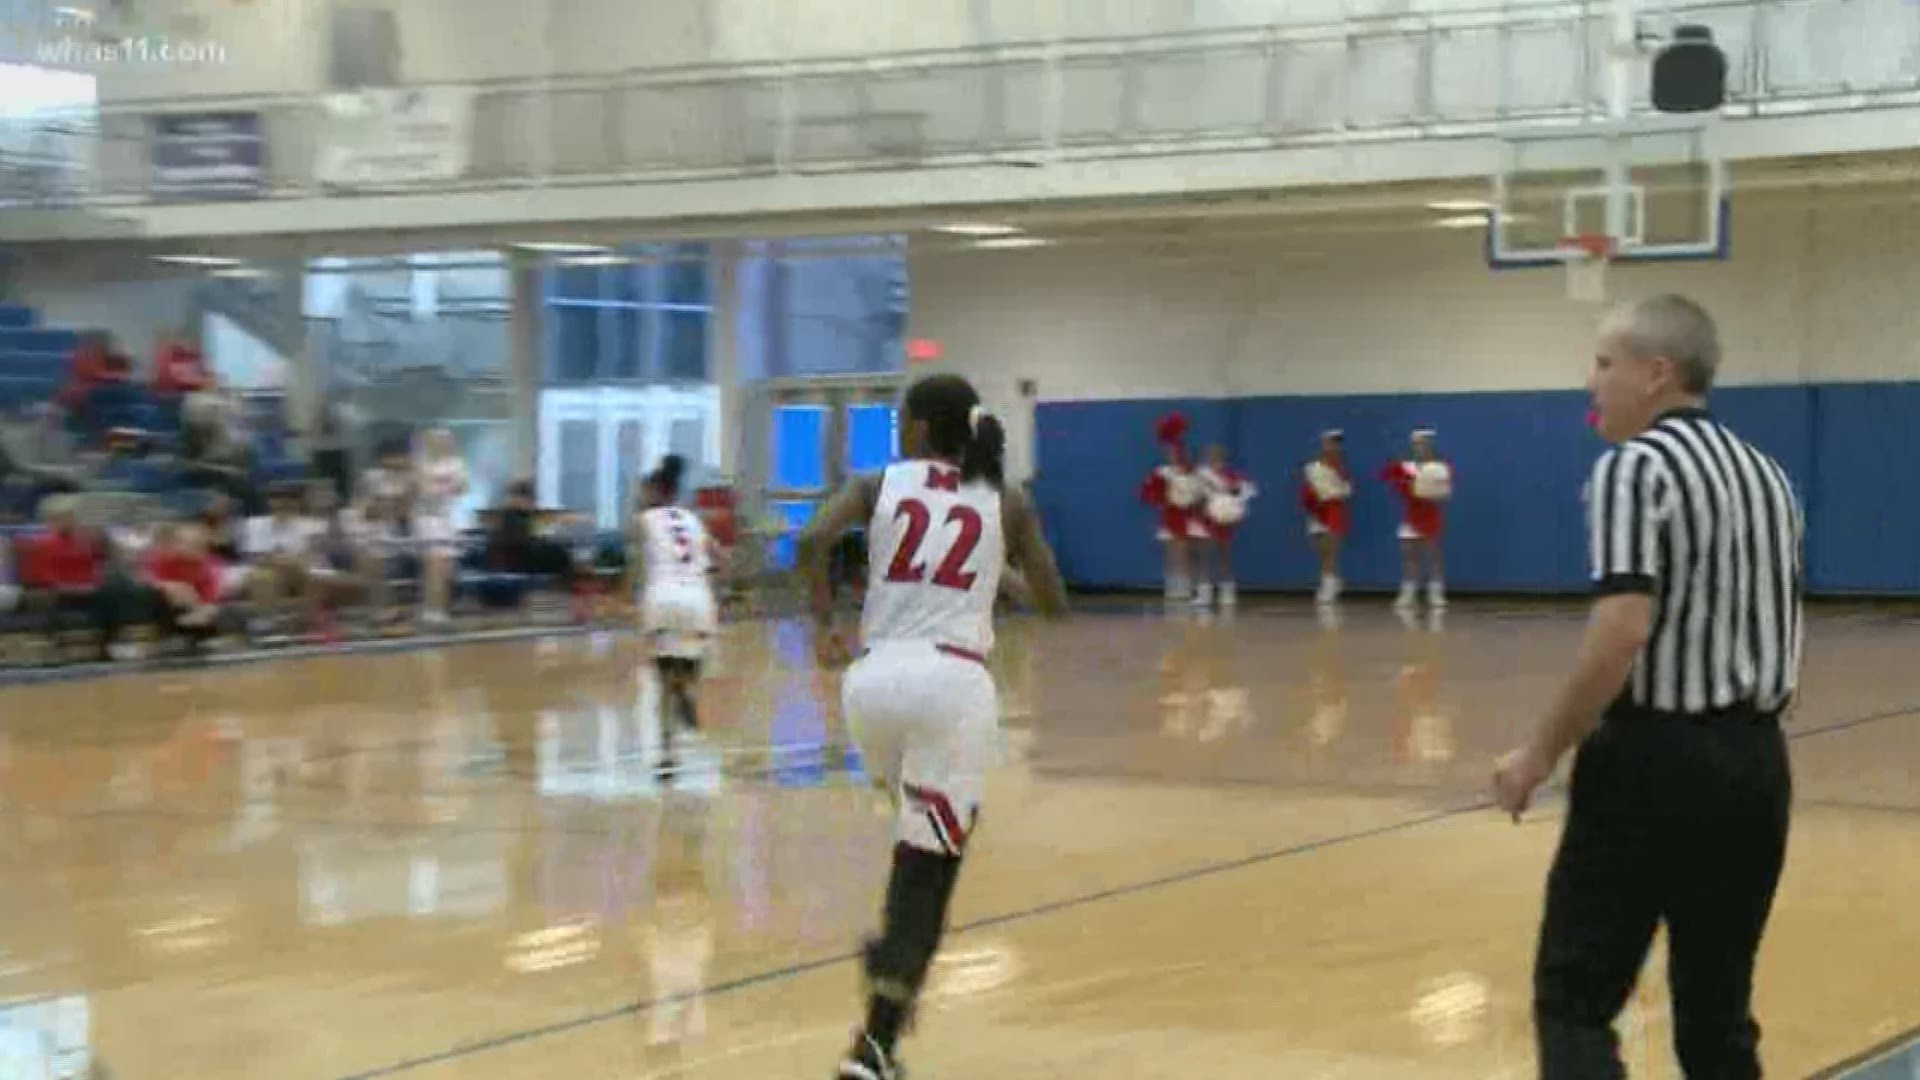 It was a close game throughout but Manual survives Mercy 61-59 and will face Sacred Heart in Sunday's final.